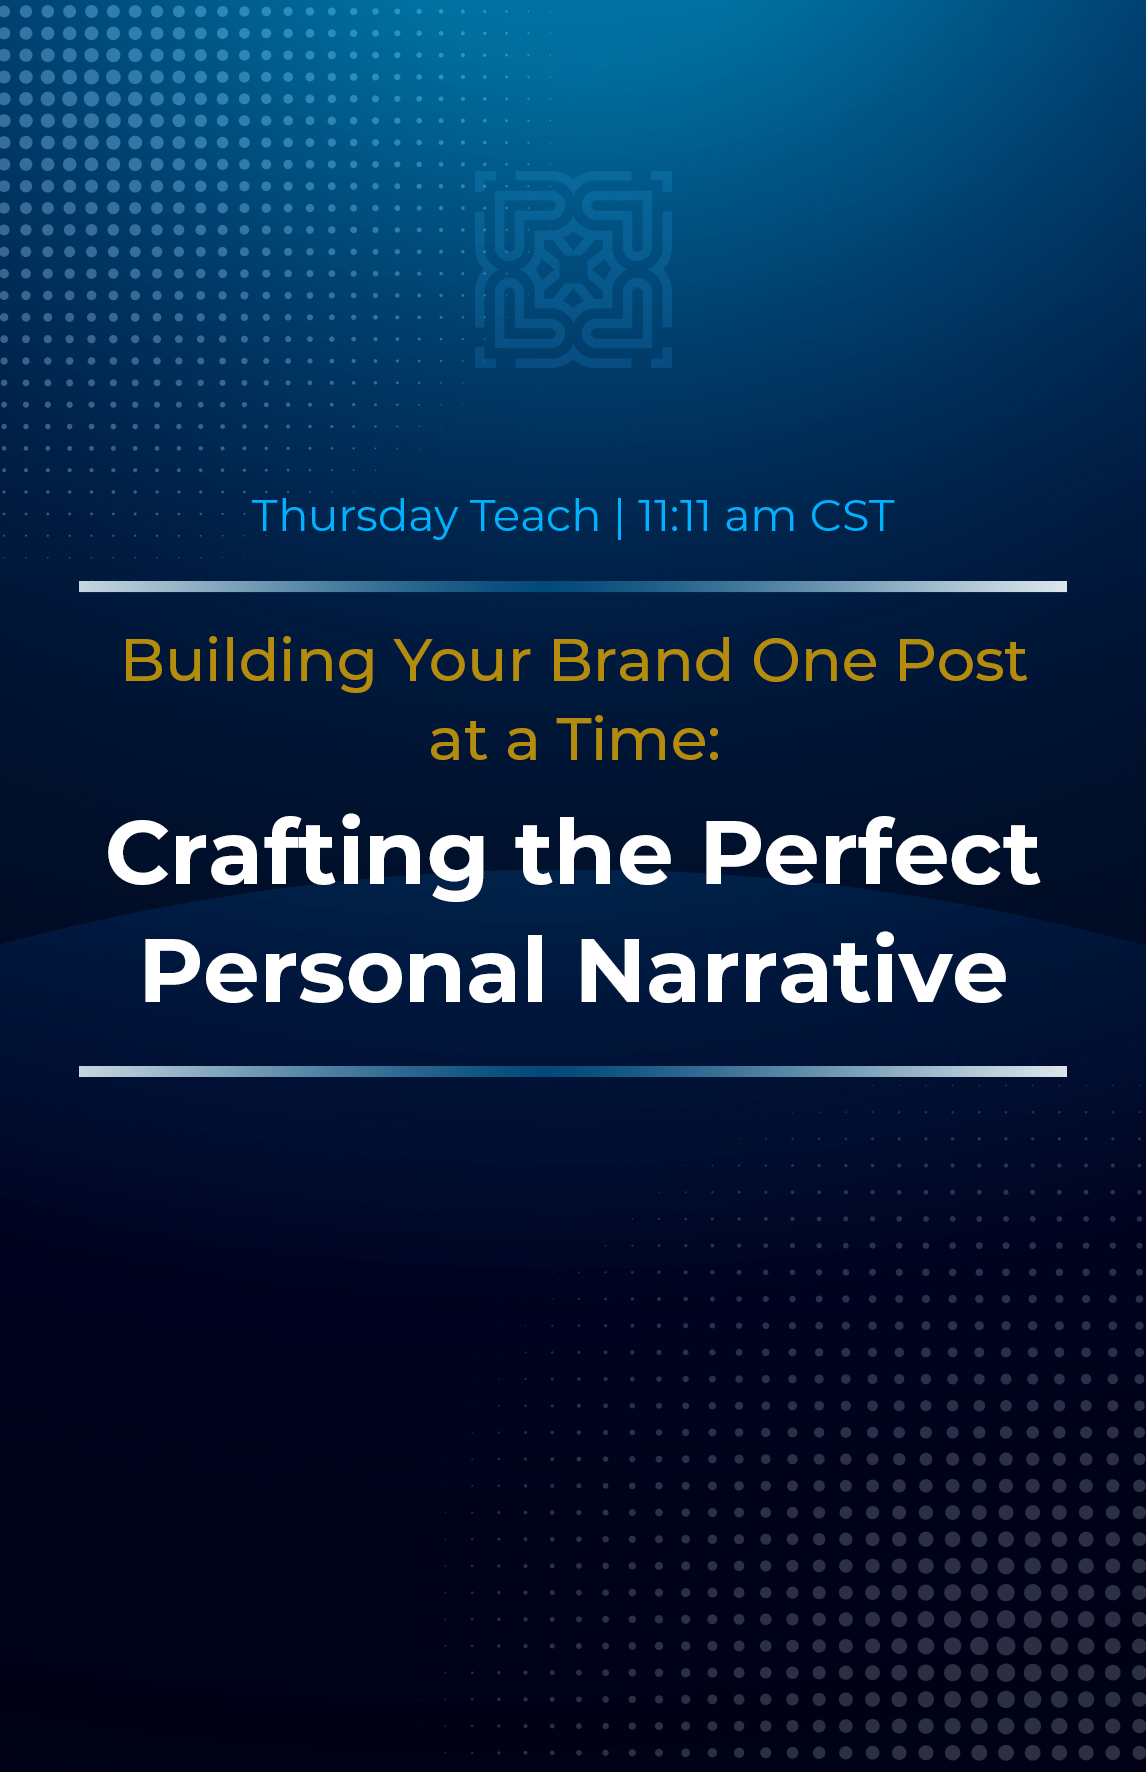 Crafting the Perfect Personal Narrative